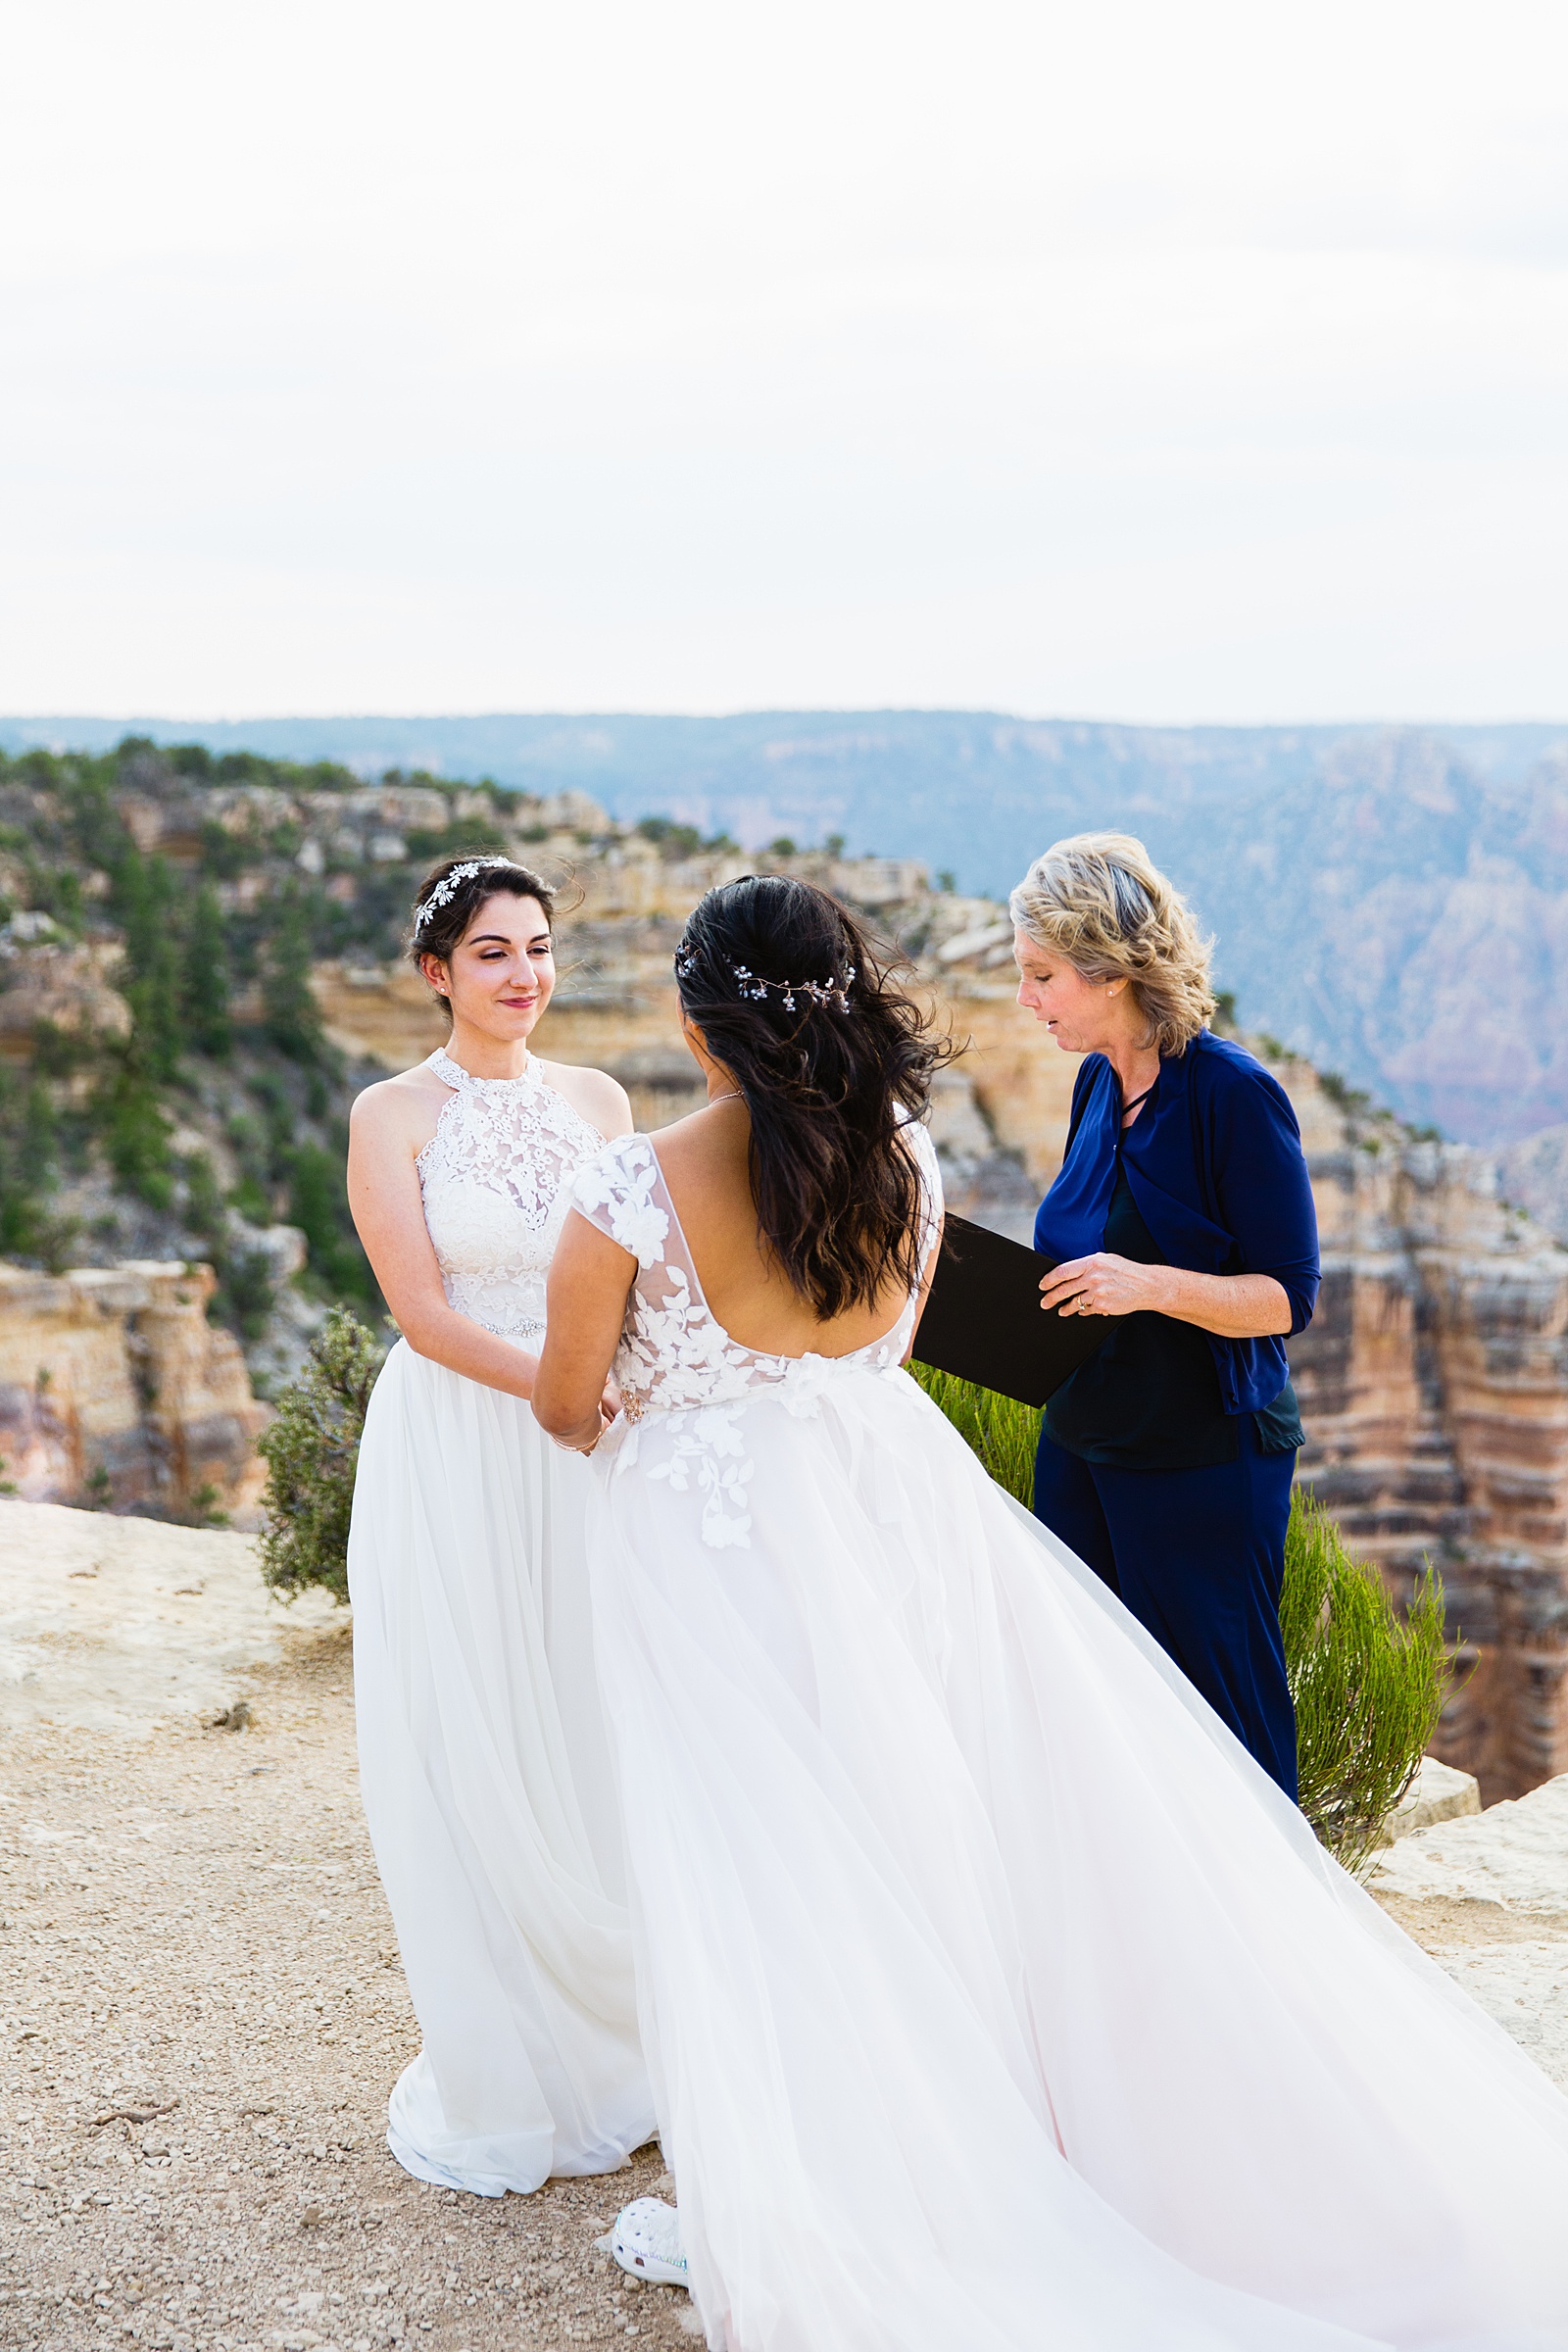 Brides looking at each other during their wedding ceremony at Moran Point by Grand Canyon elopement photographer PMA Photography.